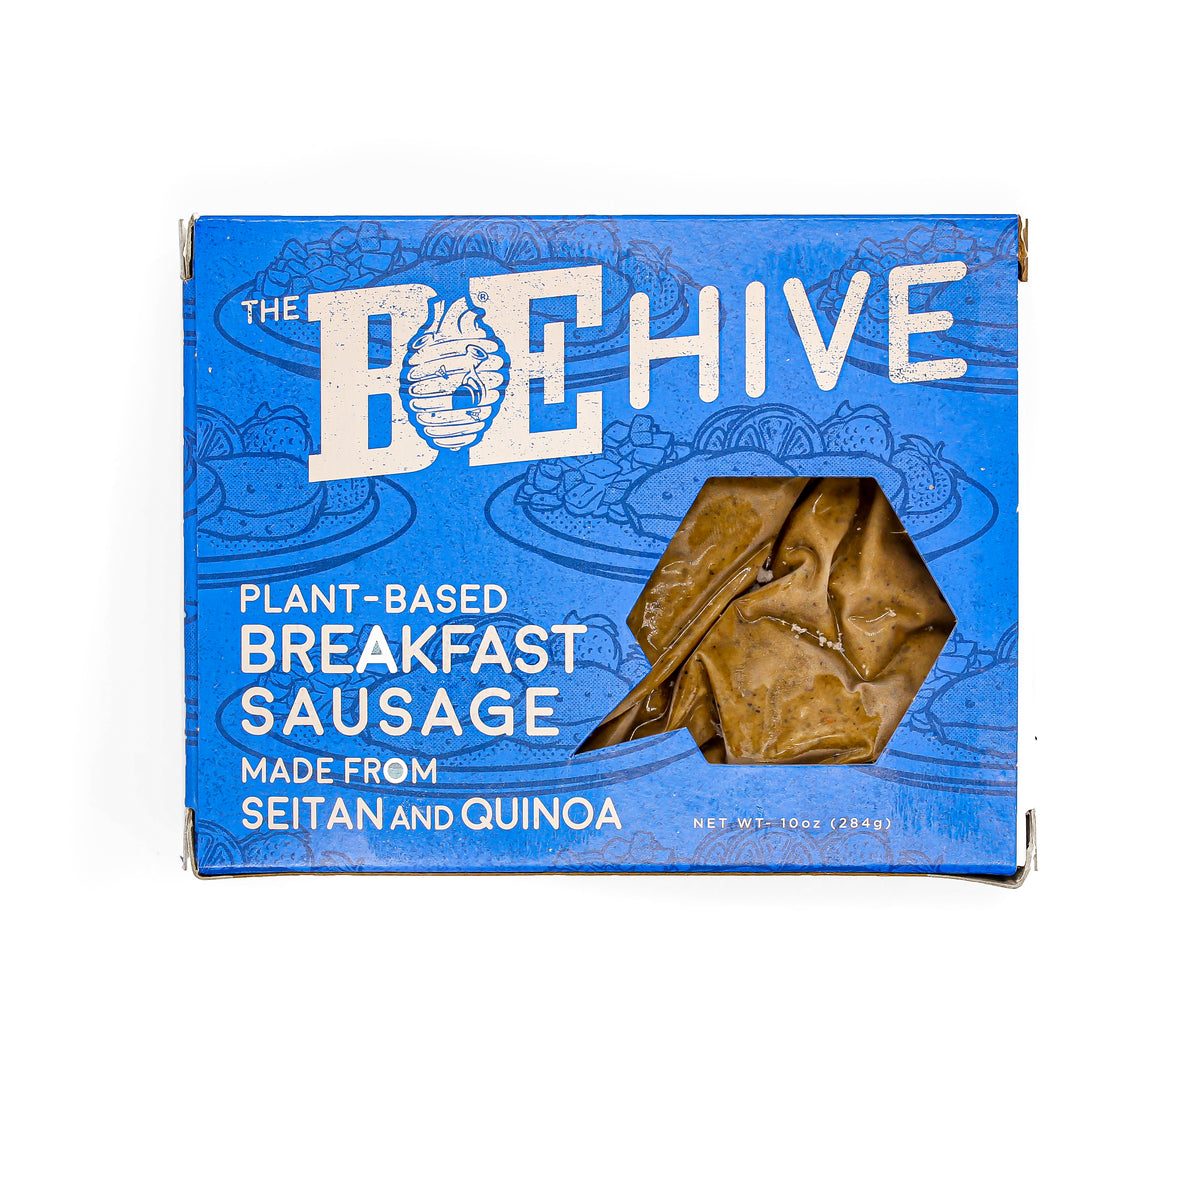 The BE-Hive Breakfast Sausage